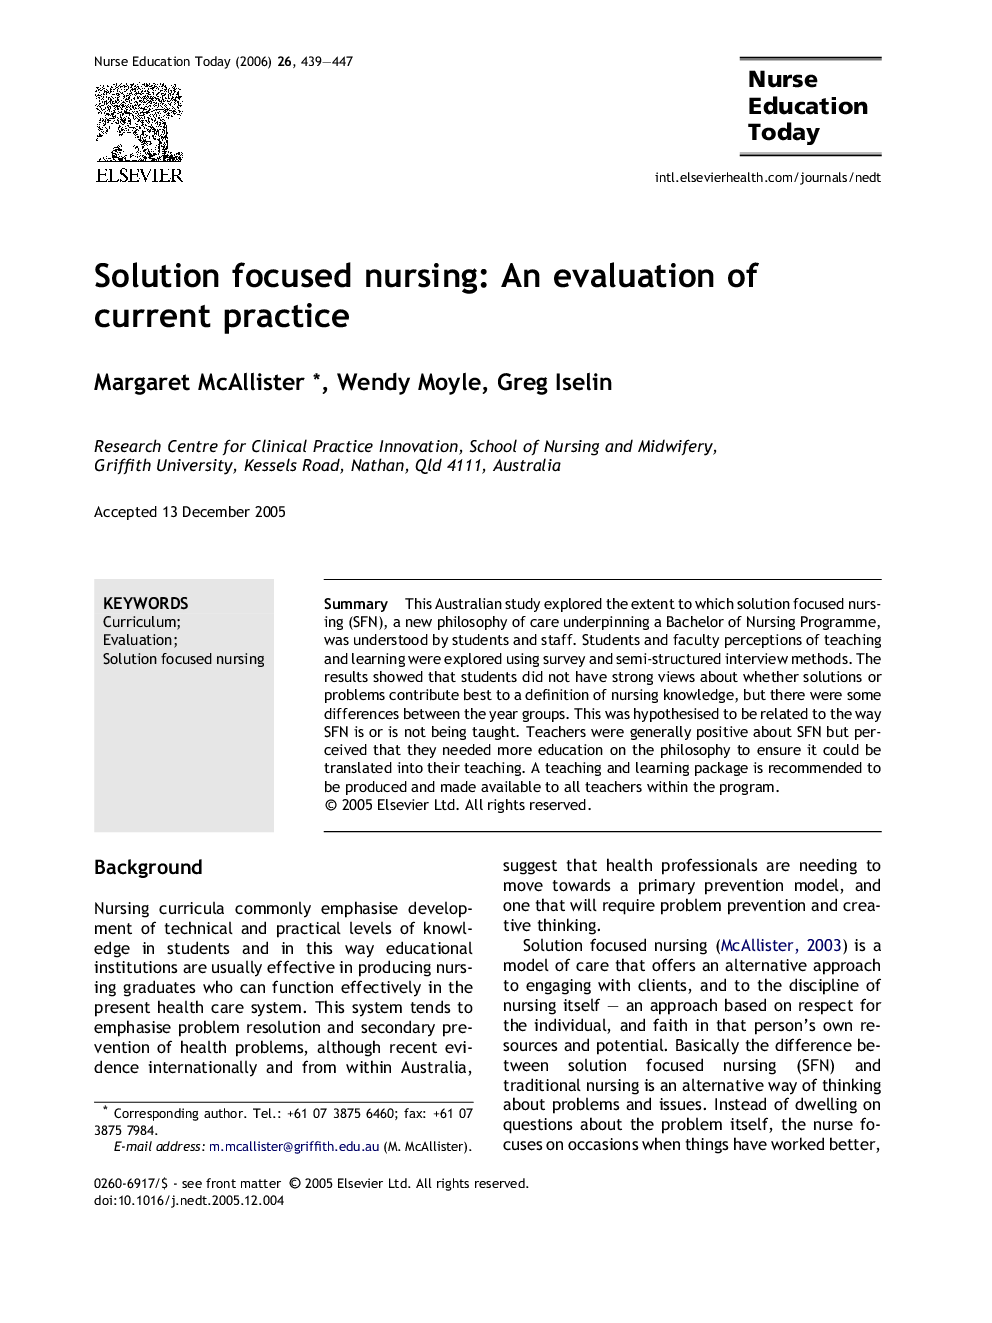 Solution focused nursing: An evaluation of current practice